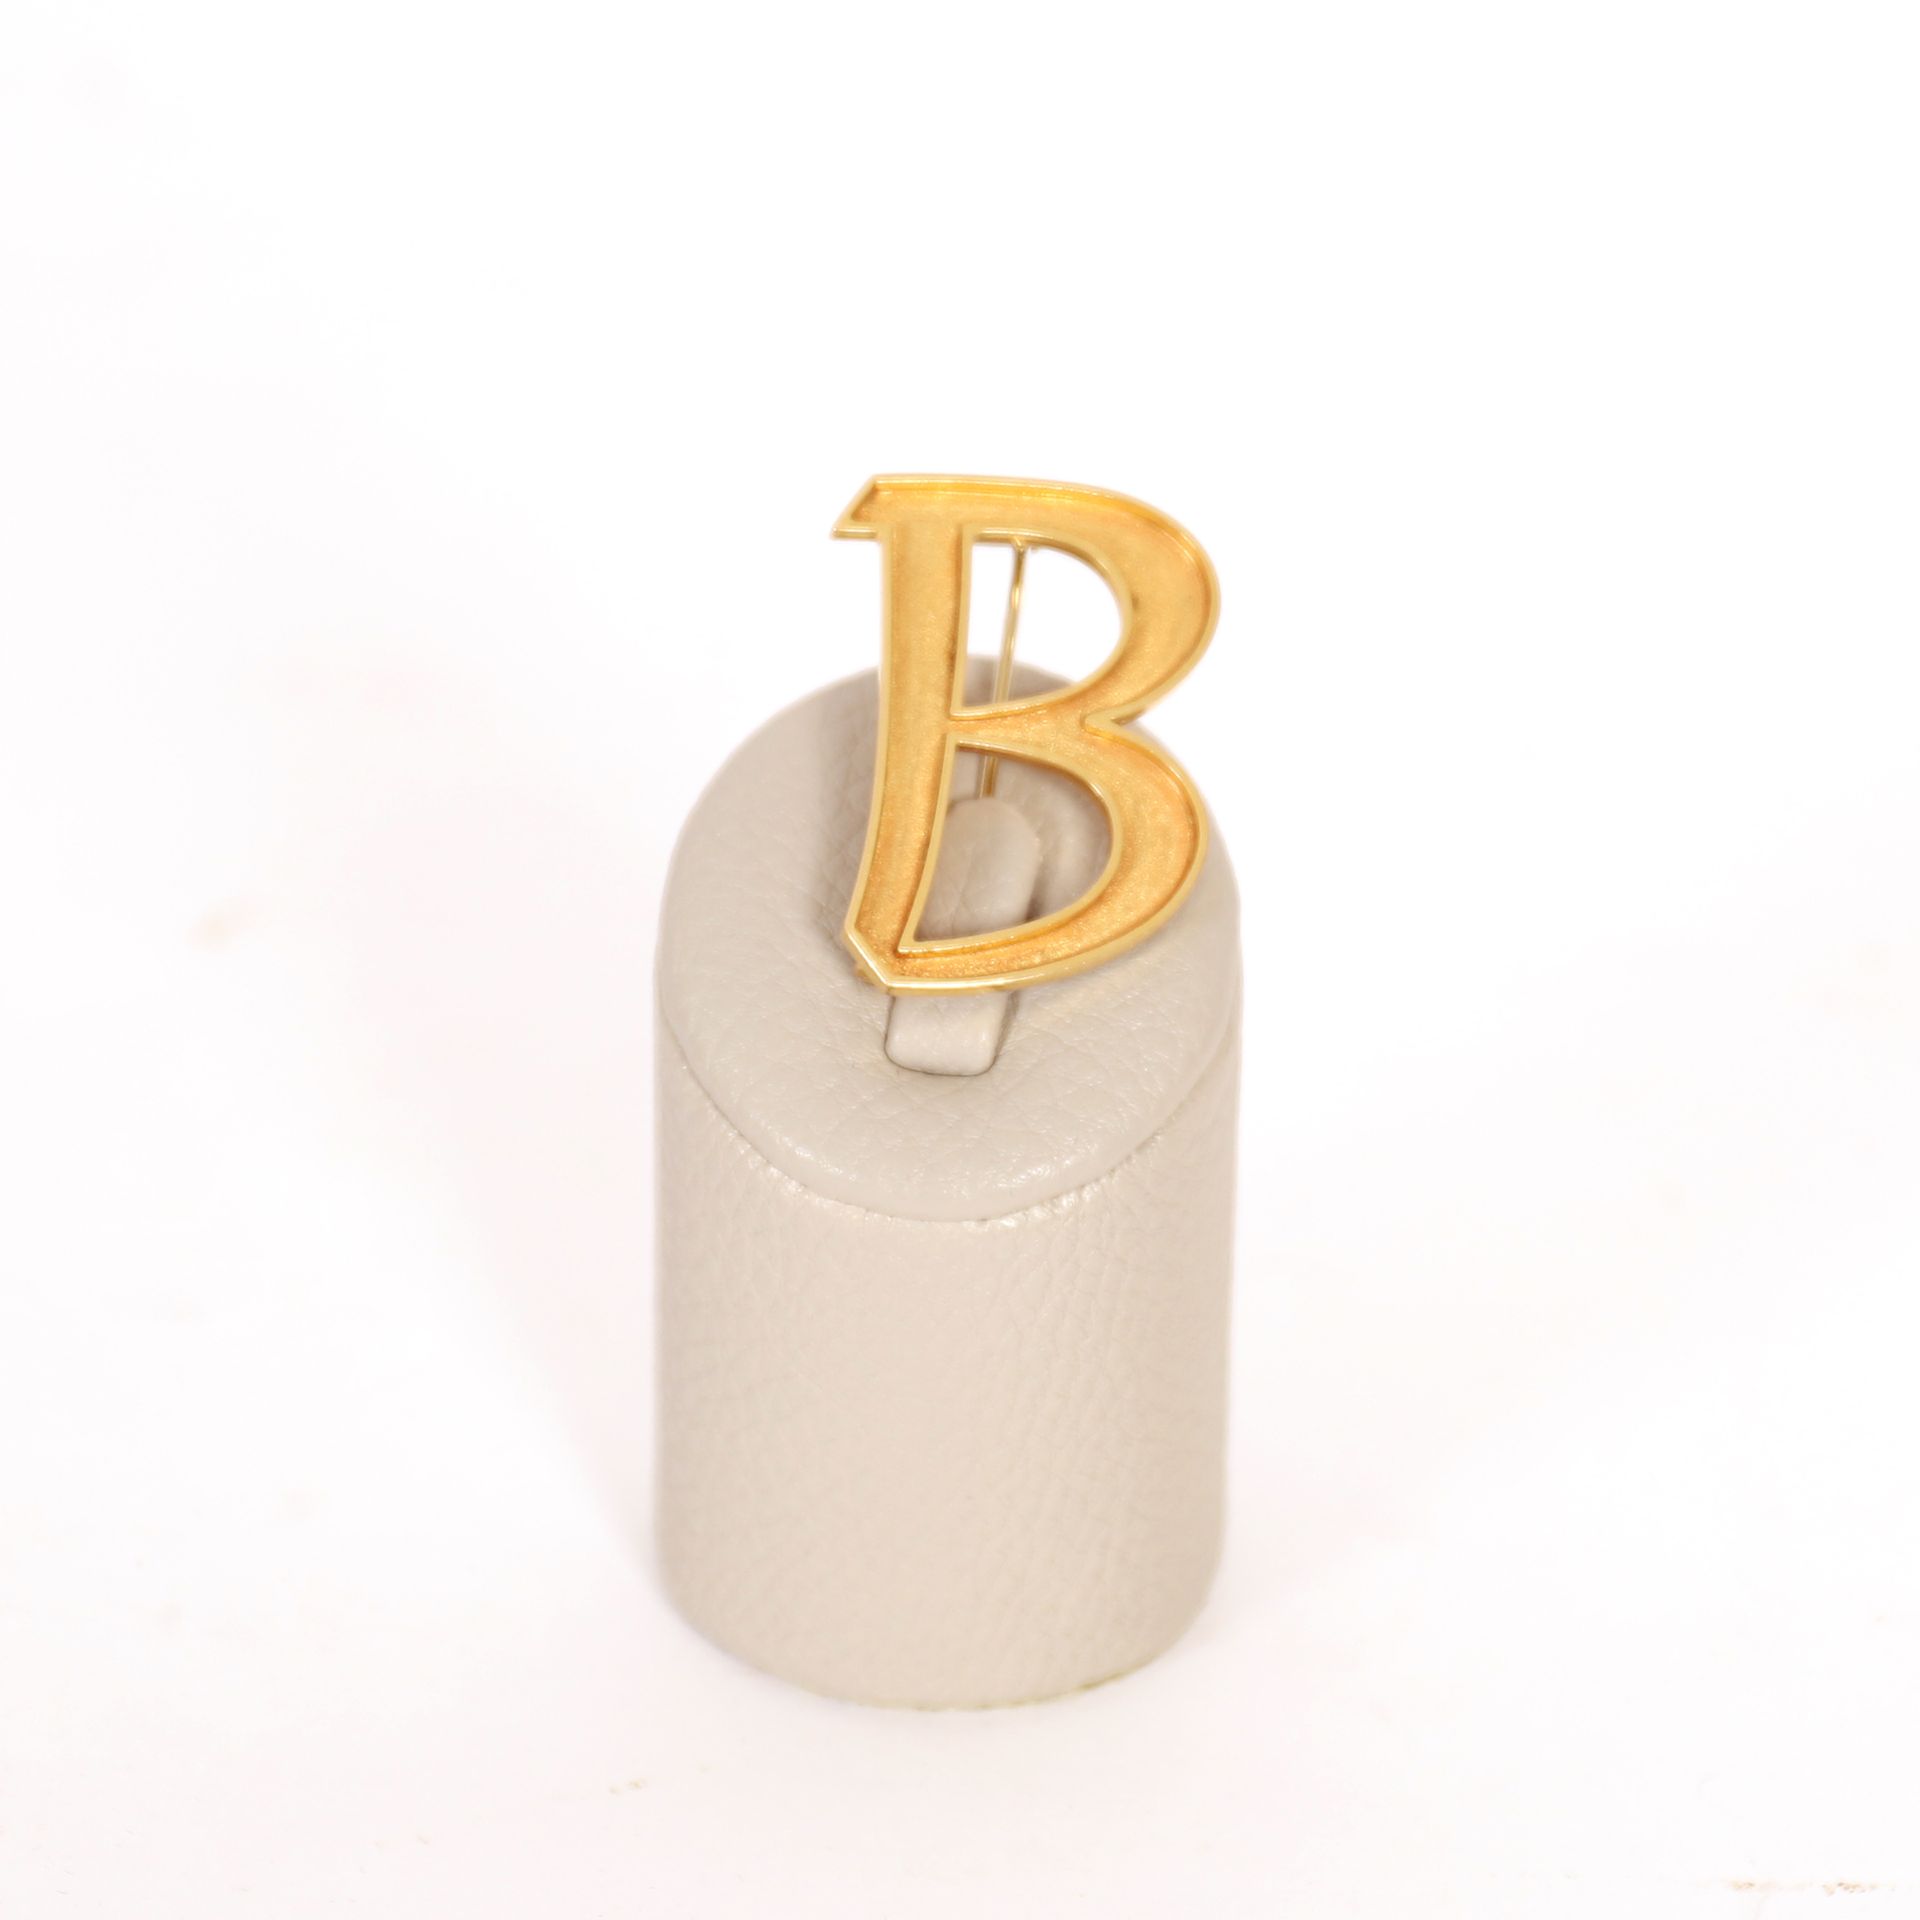 Null BROOCH "B" IN YELLOW GOLD

H : 4 cm

Weight : 12 grs